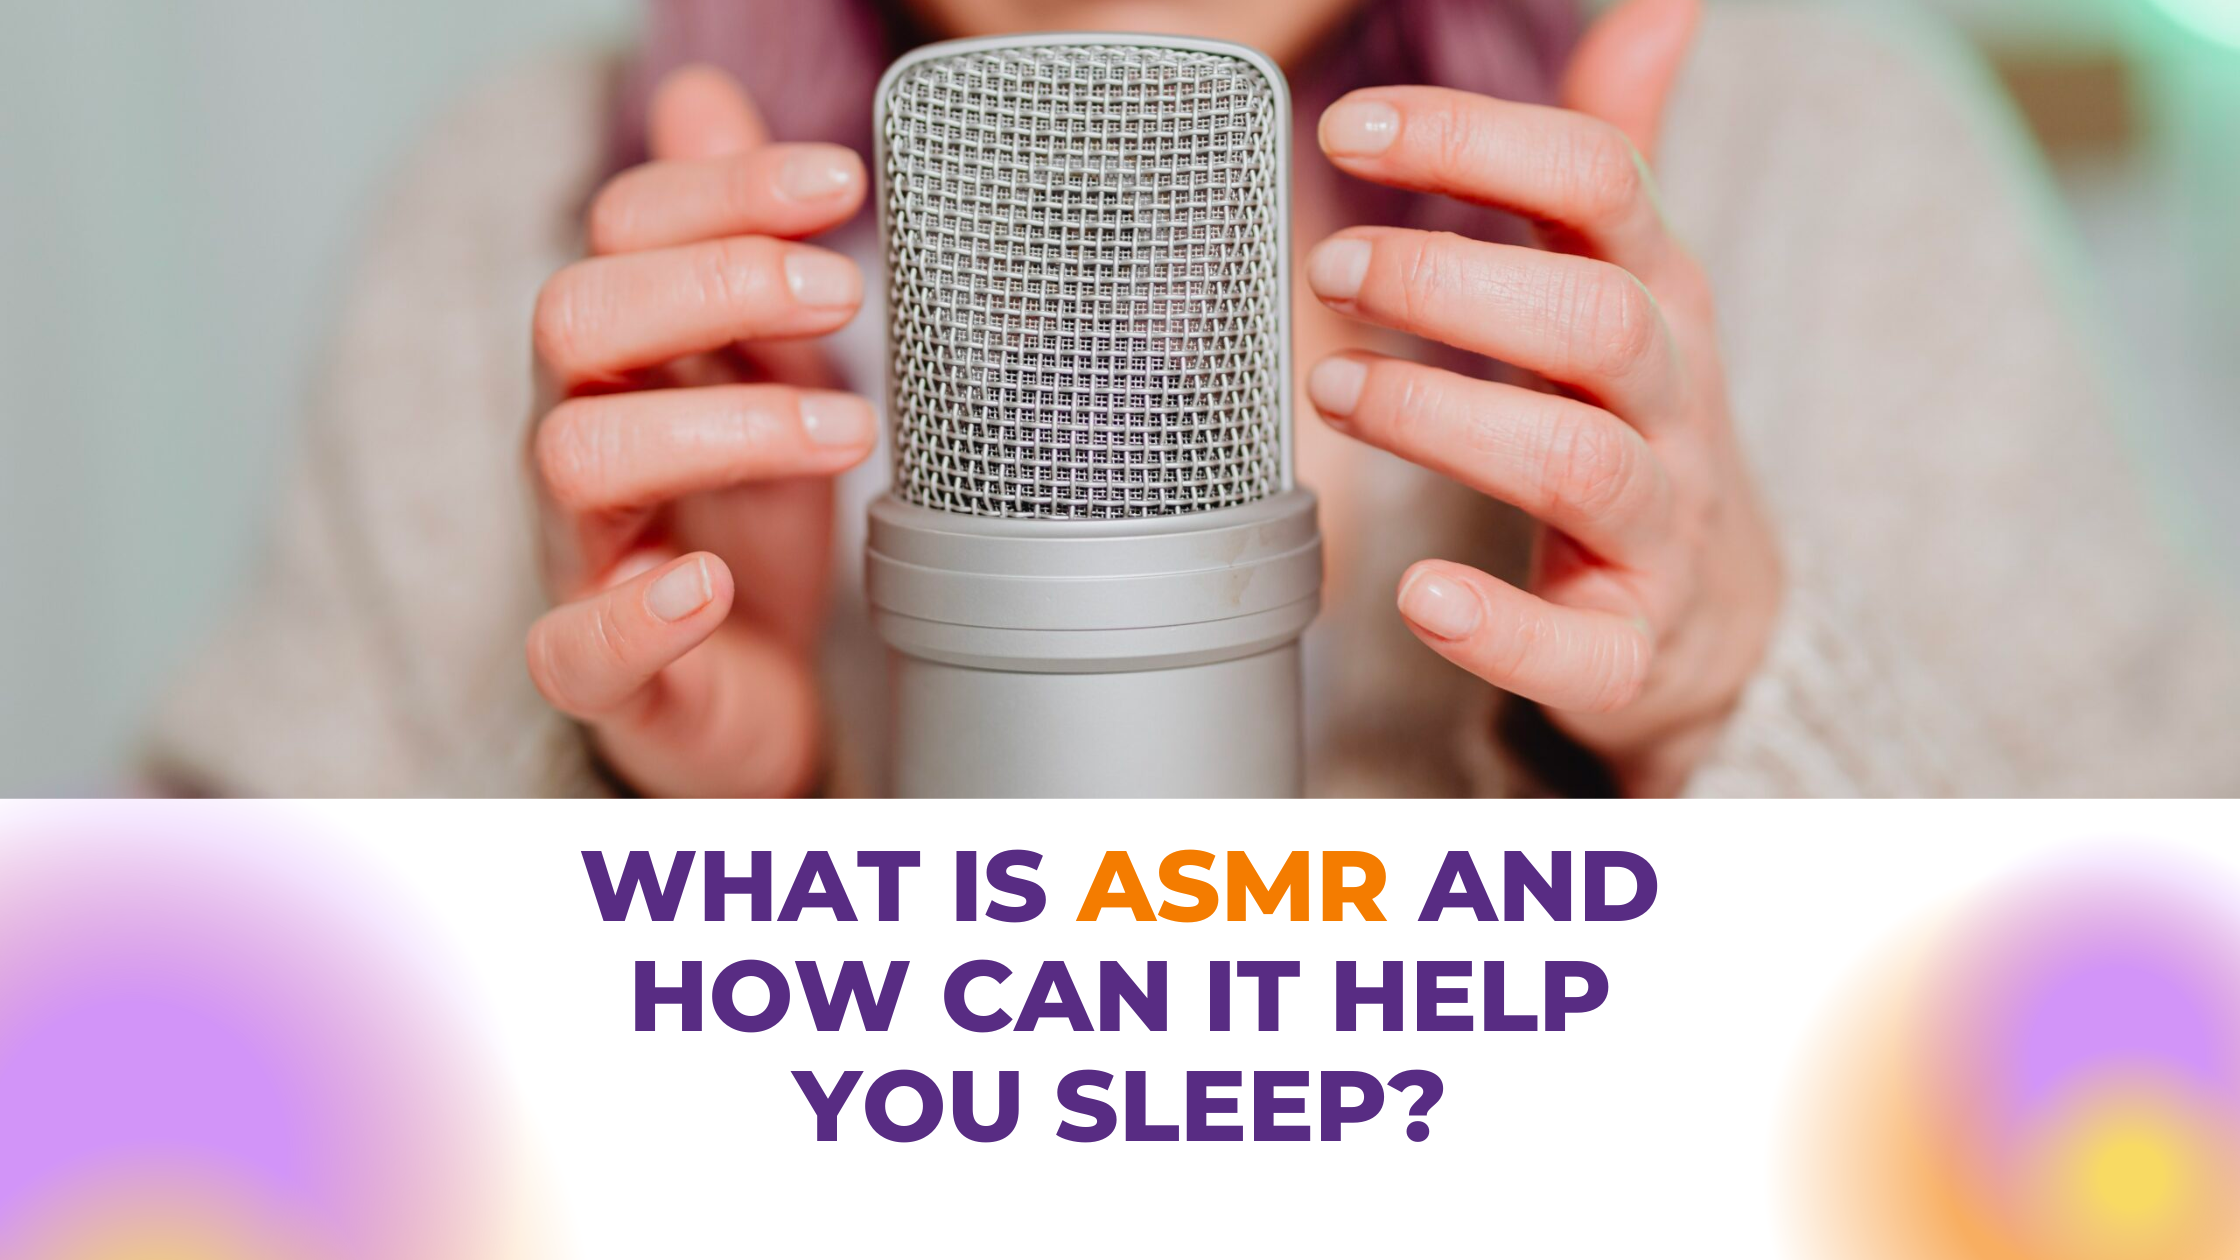 ASMR: What Is It and How Does It Help Sleep?